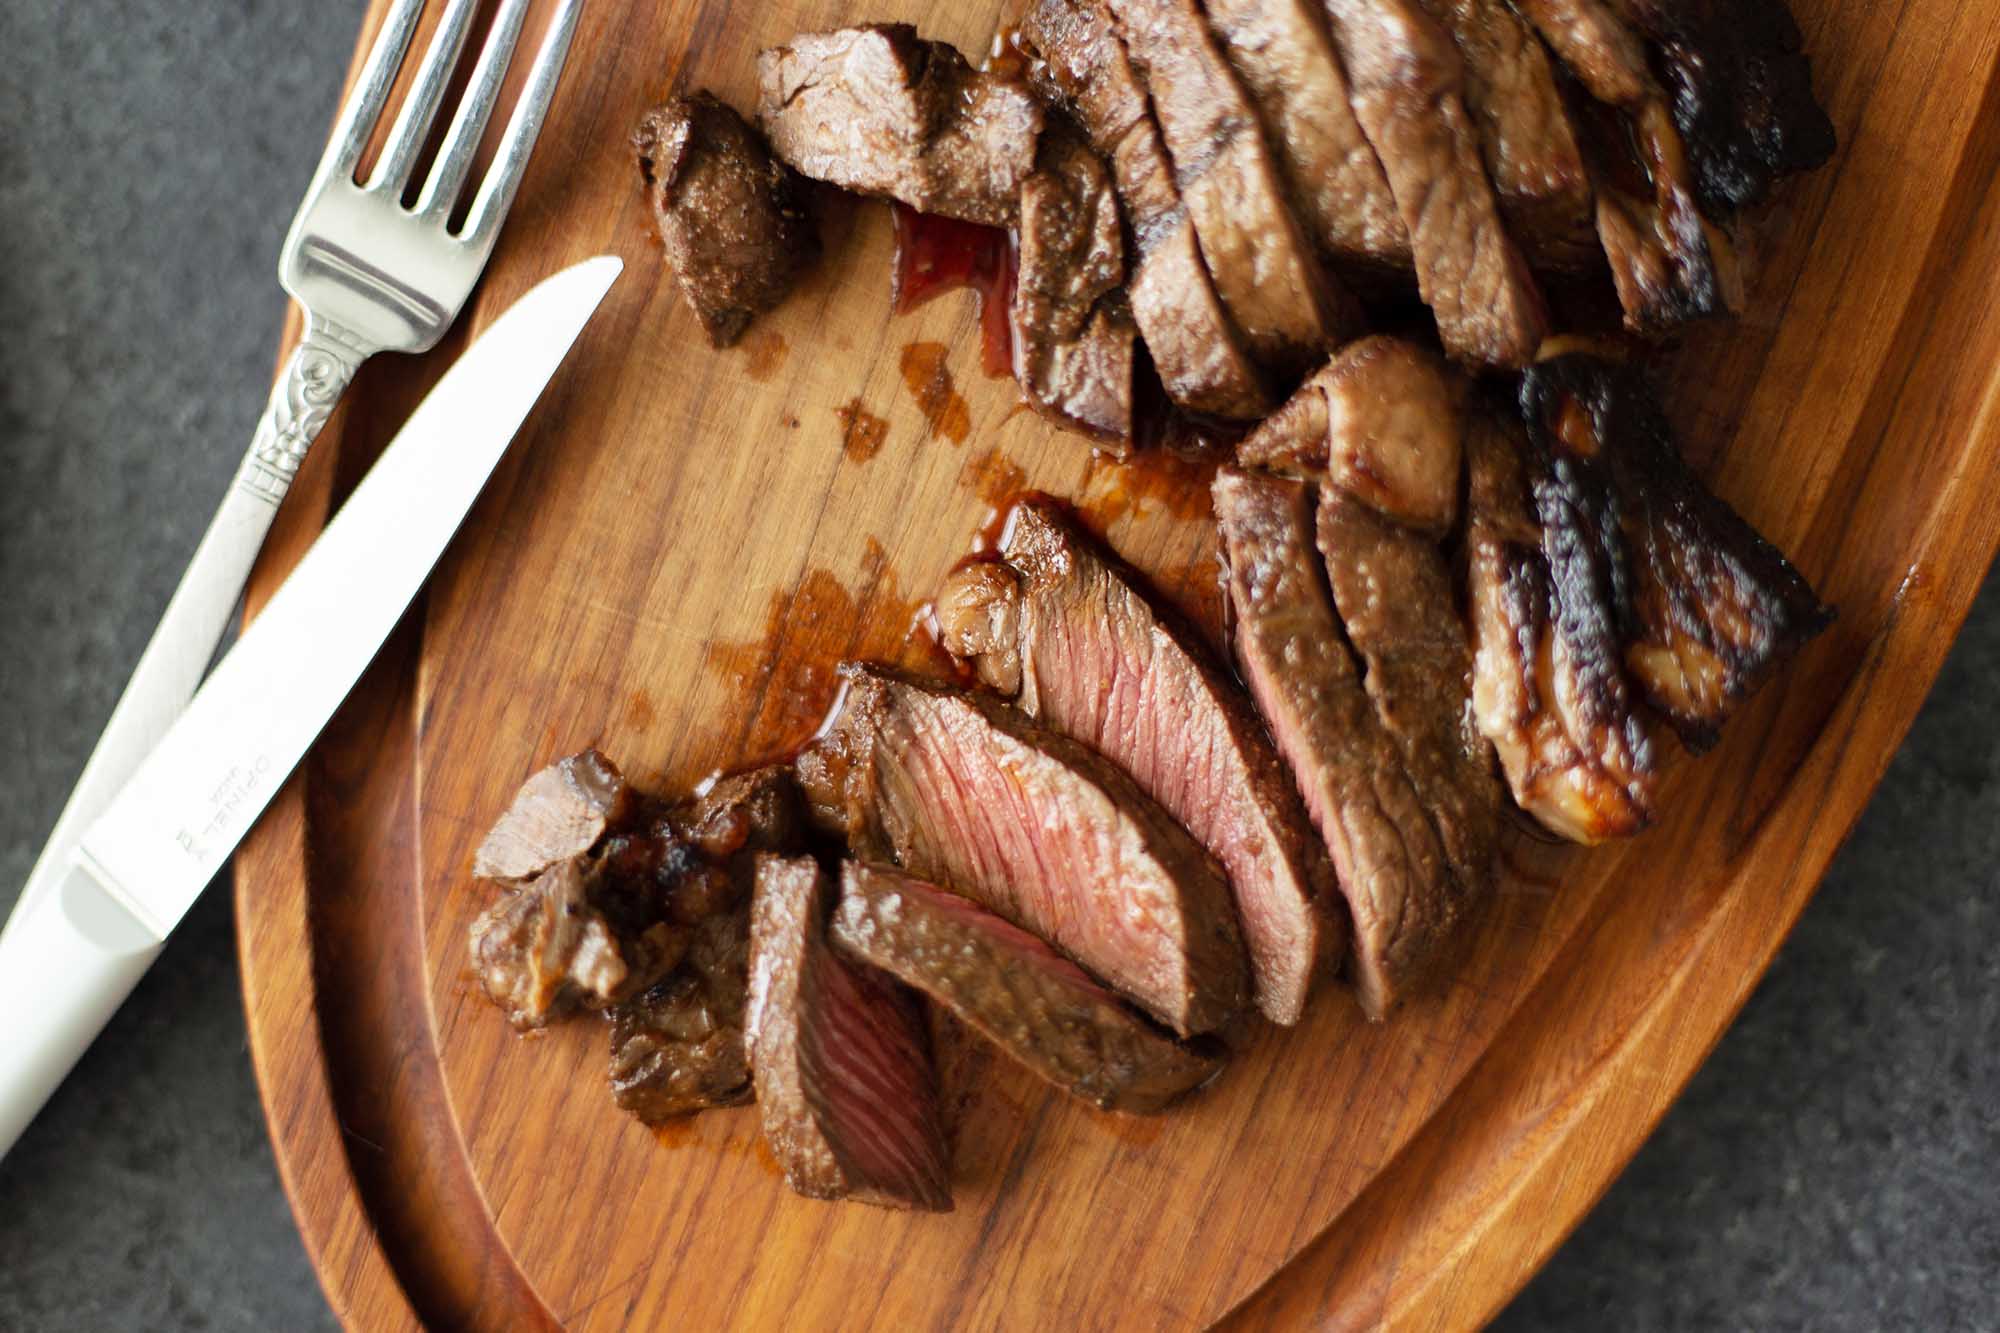 Overhead view of sliced oven broiled steak and silverware on a wooden cutting board.